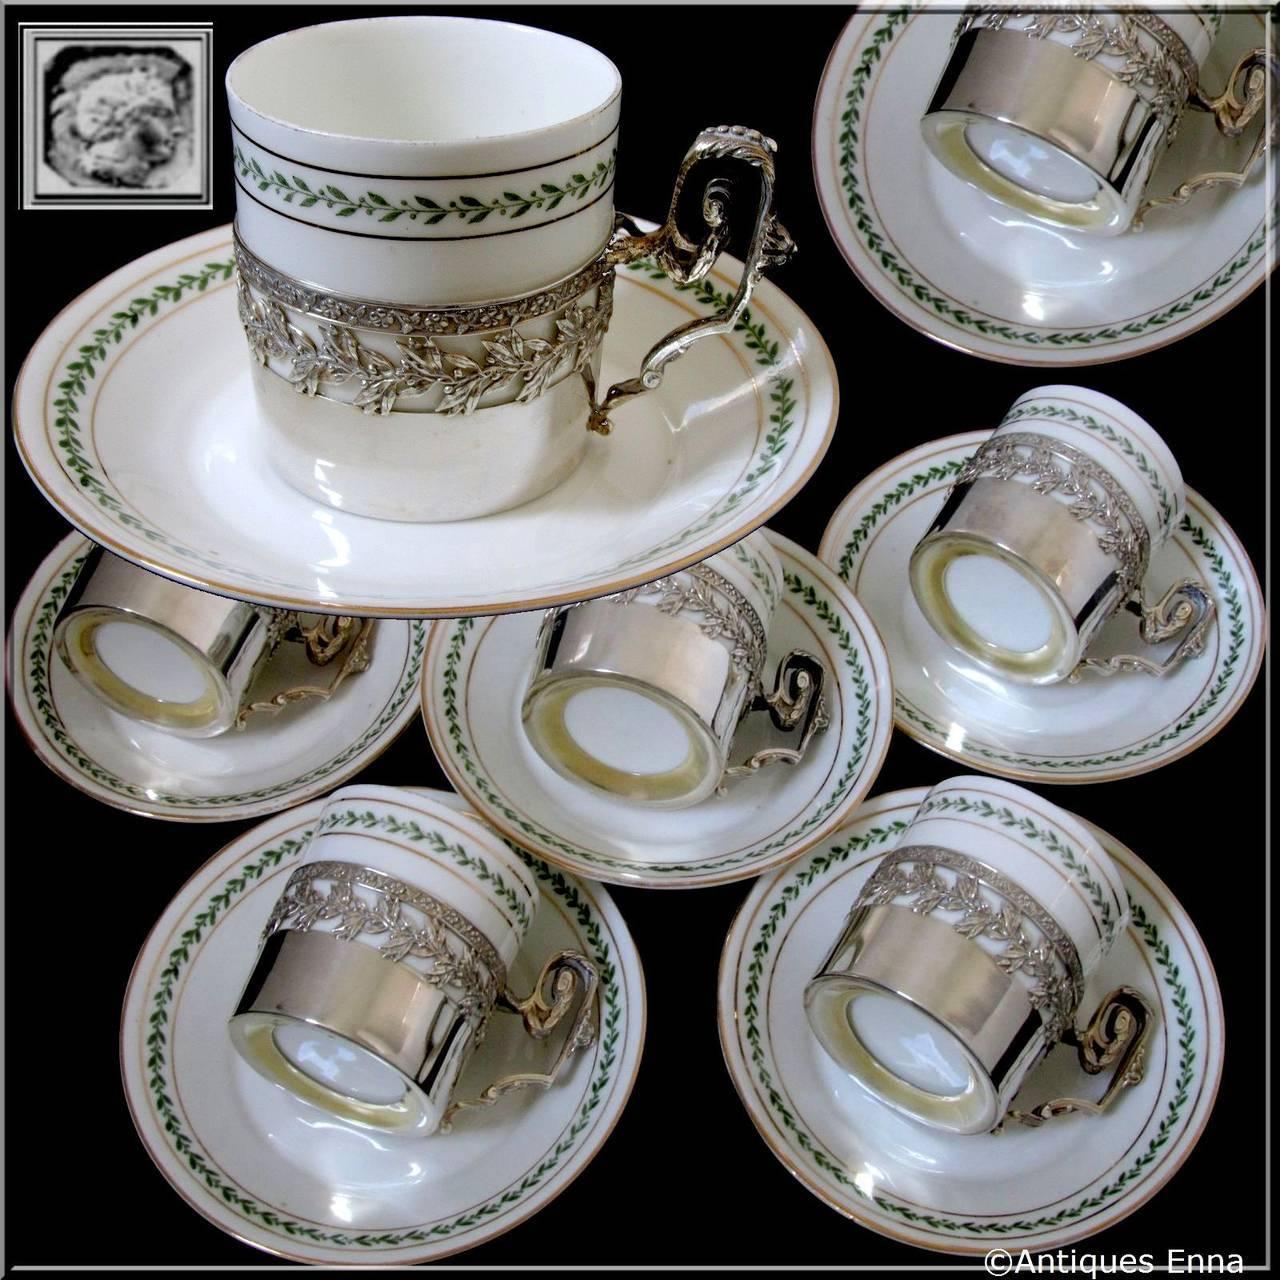 1870s French sterling silver porcelain of Paris six coffee tea cups with saucers Empire pattern.

Exceptional and rare service Napoleon III period, including six tea or coffee cups with matching saucers in Paris Porcelain and six demitasse in all